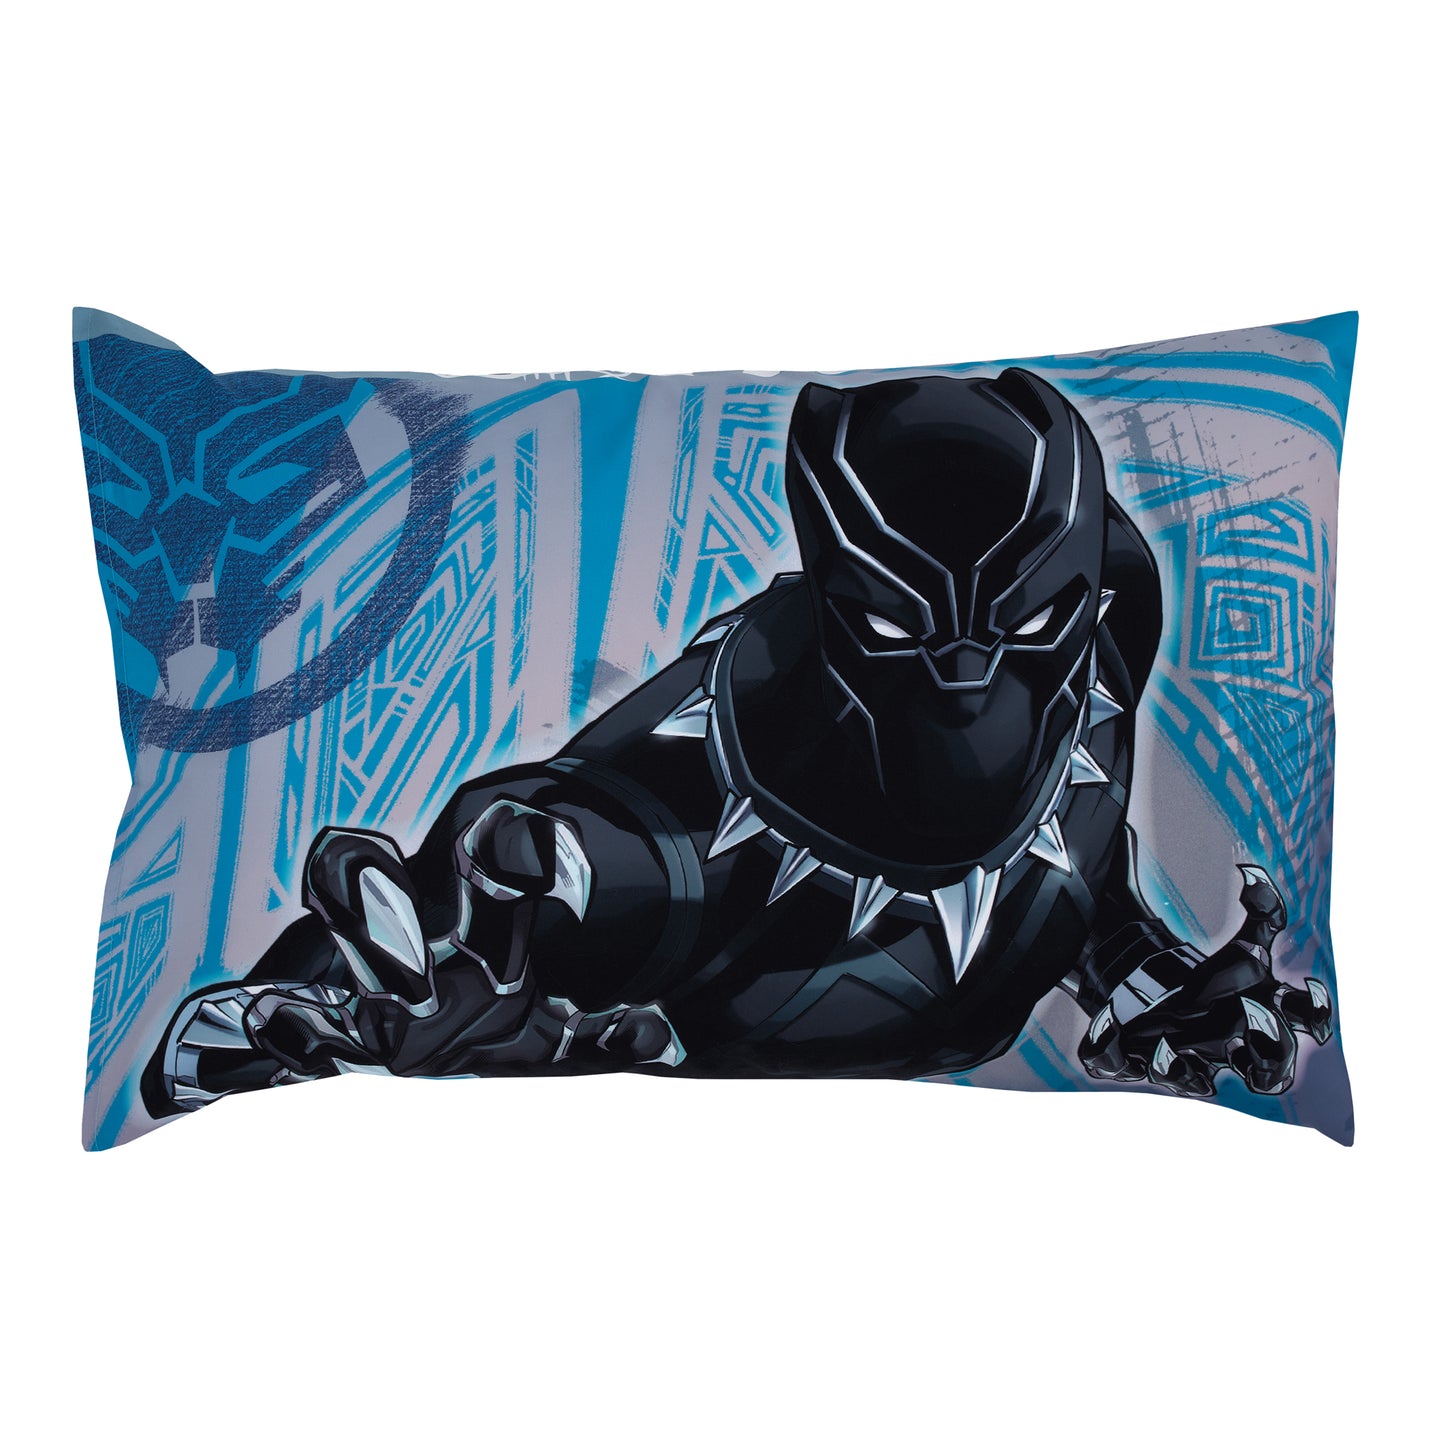 Marvel Black Panther Blue, Black, and Grey Warrior King 4 Piece Toddler Bed Set - Comforter, Fitted Bottom Sheet, Flat Top Sheet and Reversible Pillowcase